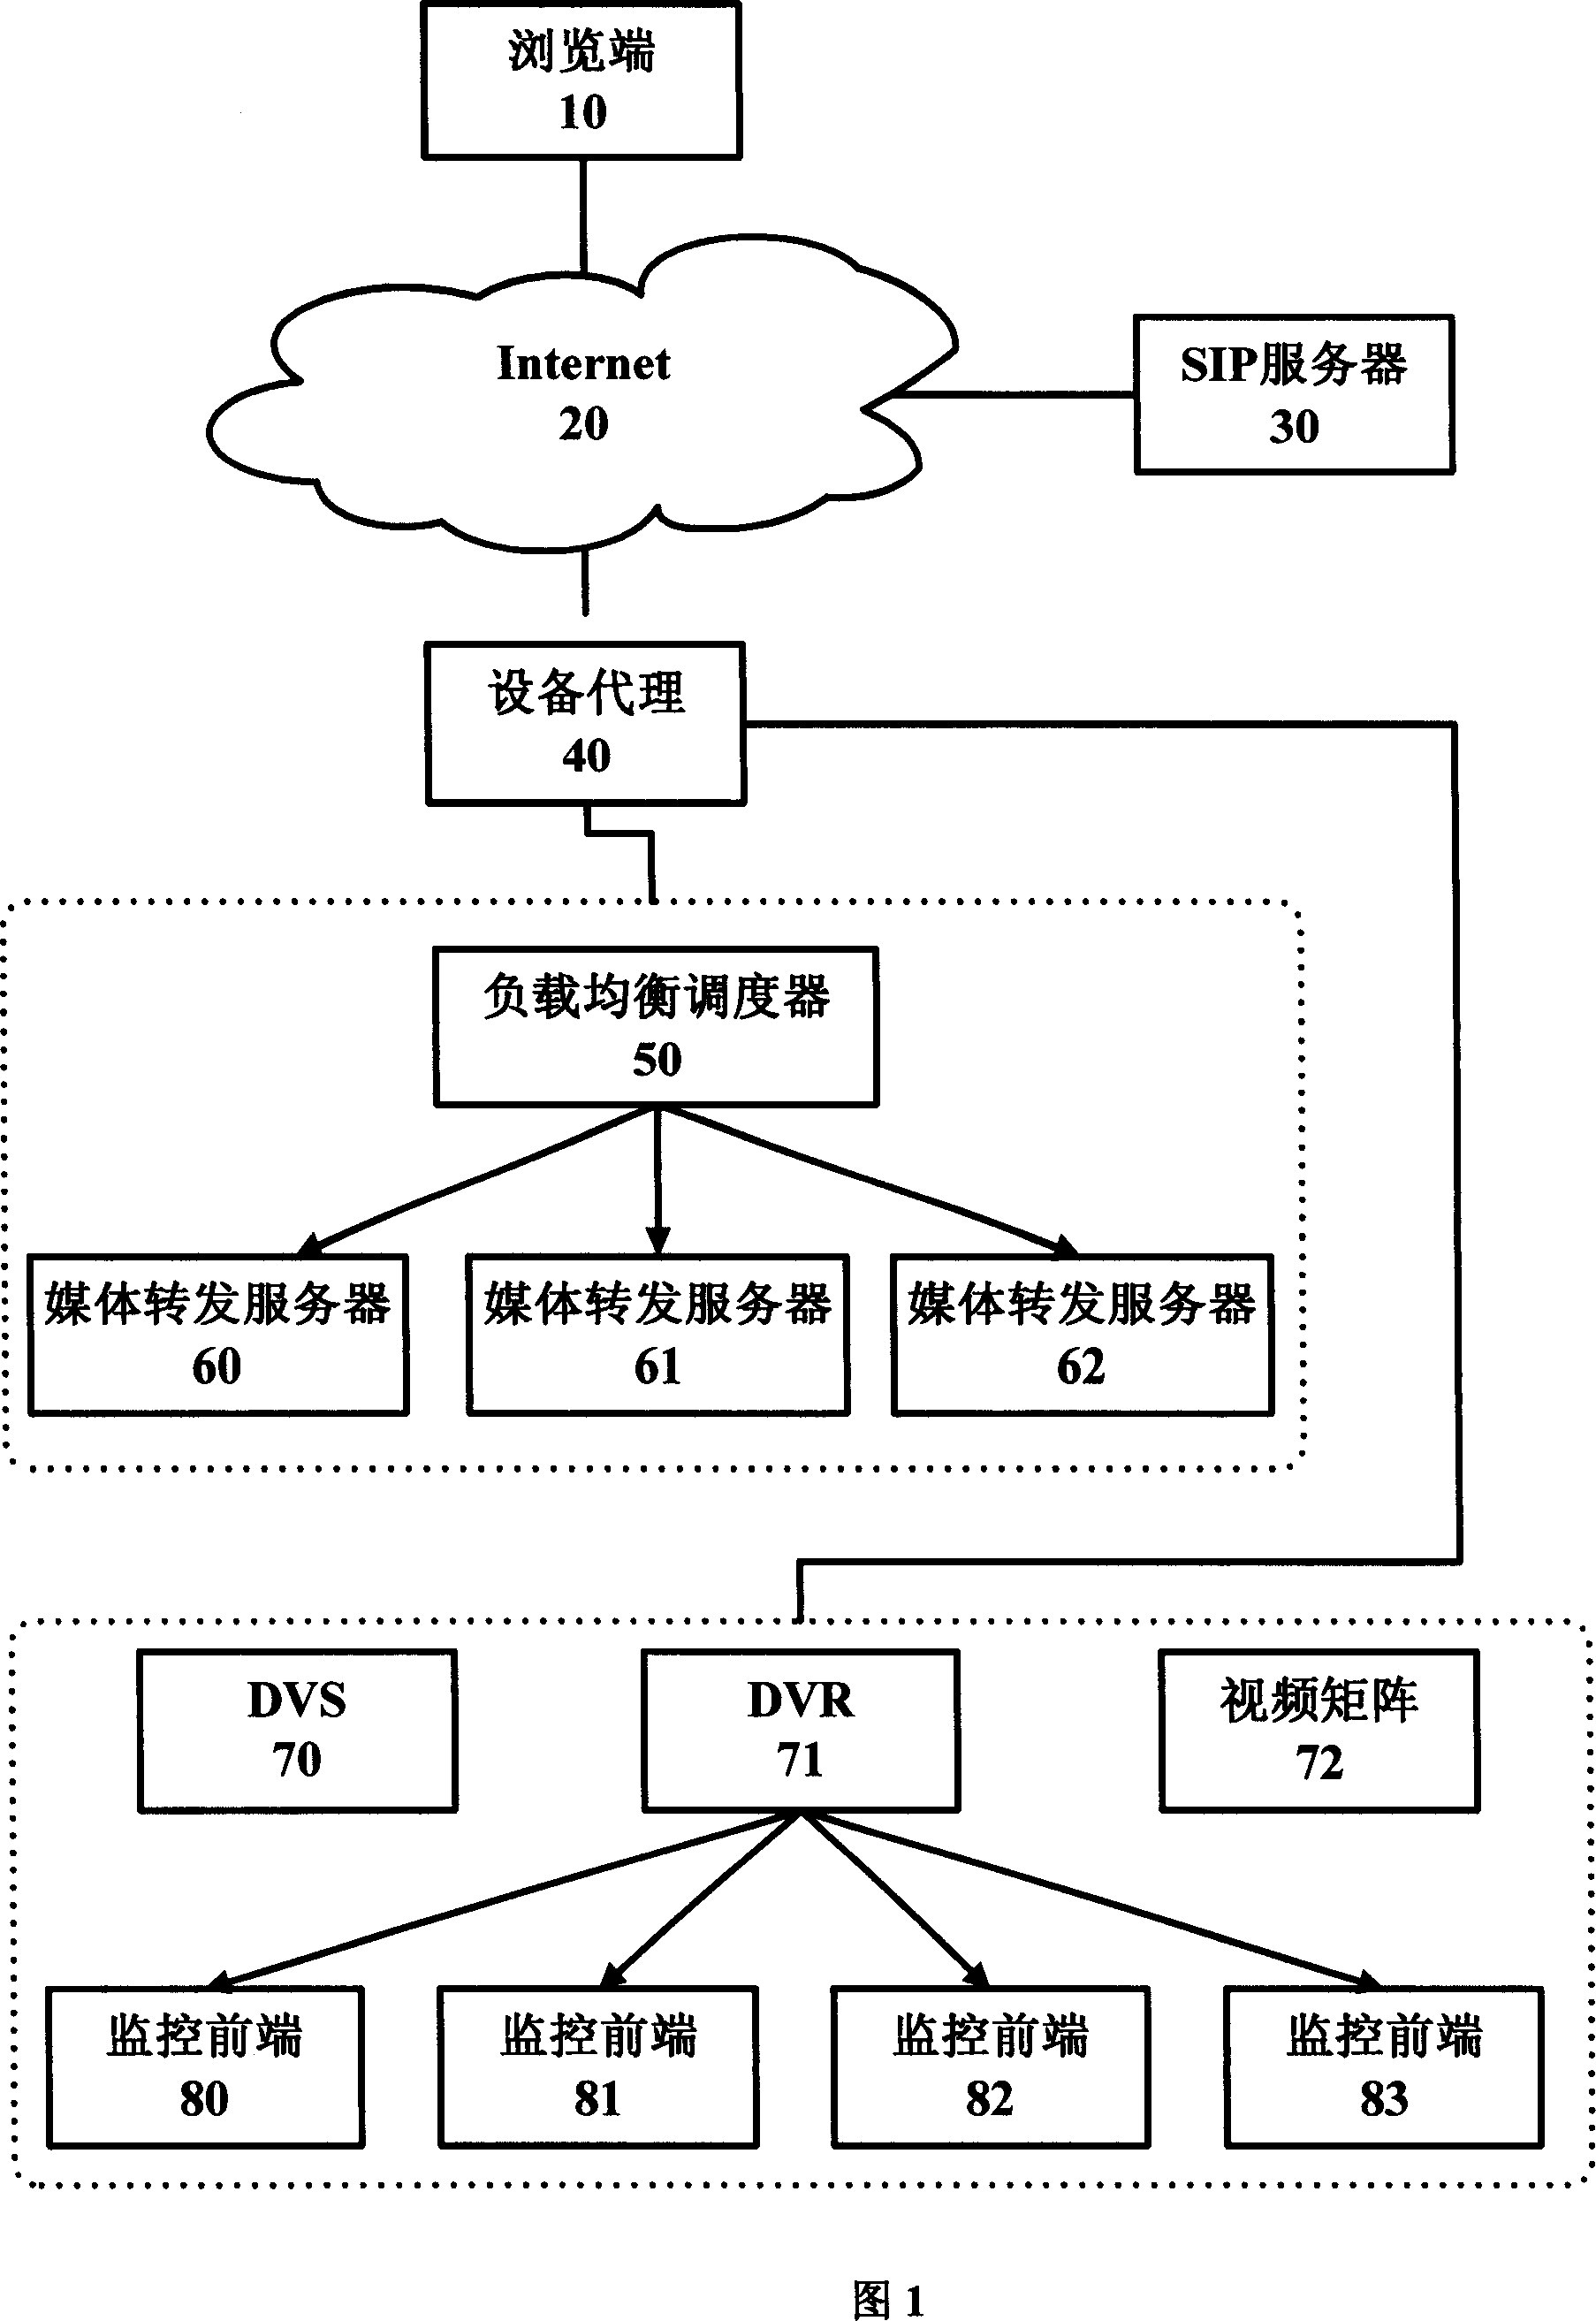 Method for implementing media flow balance dispatching in vedio service